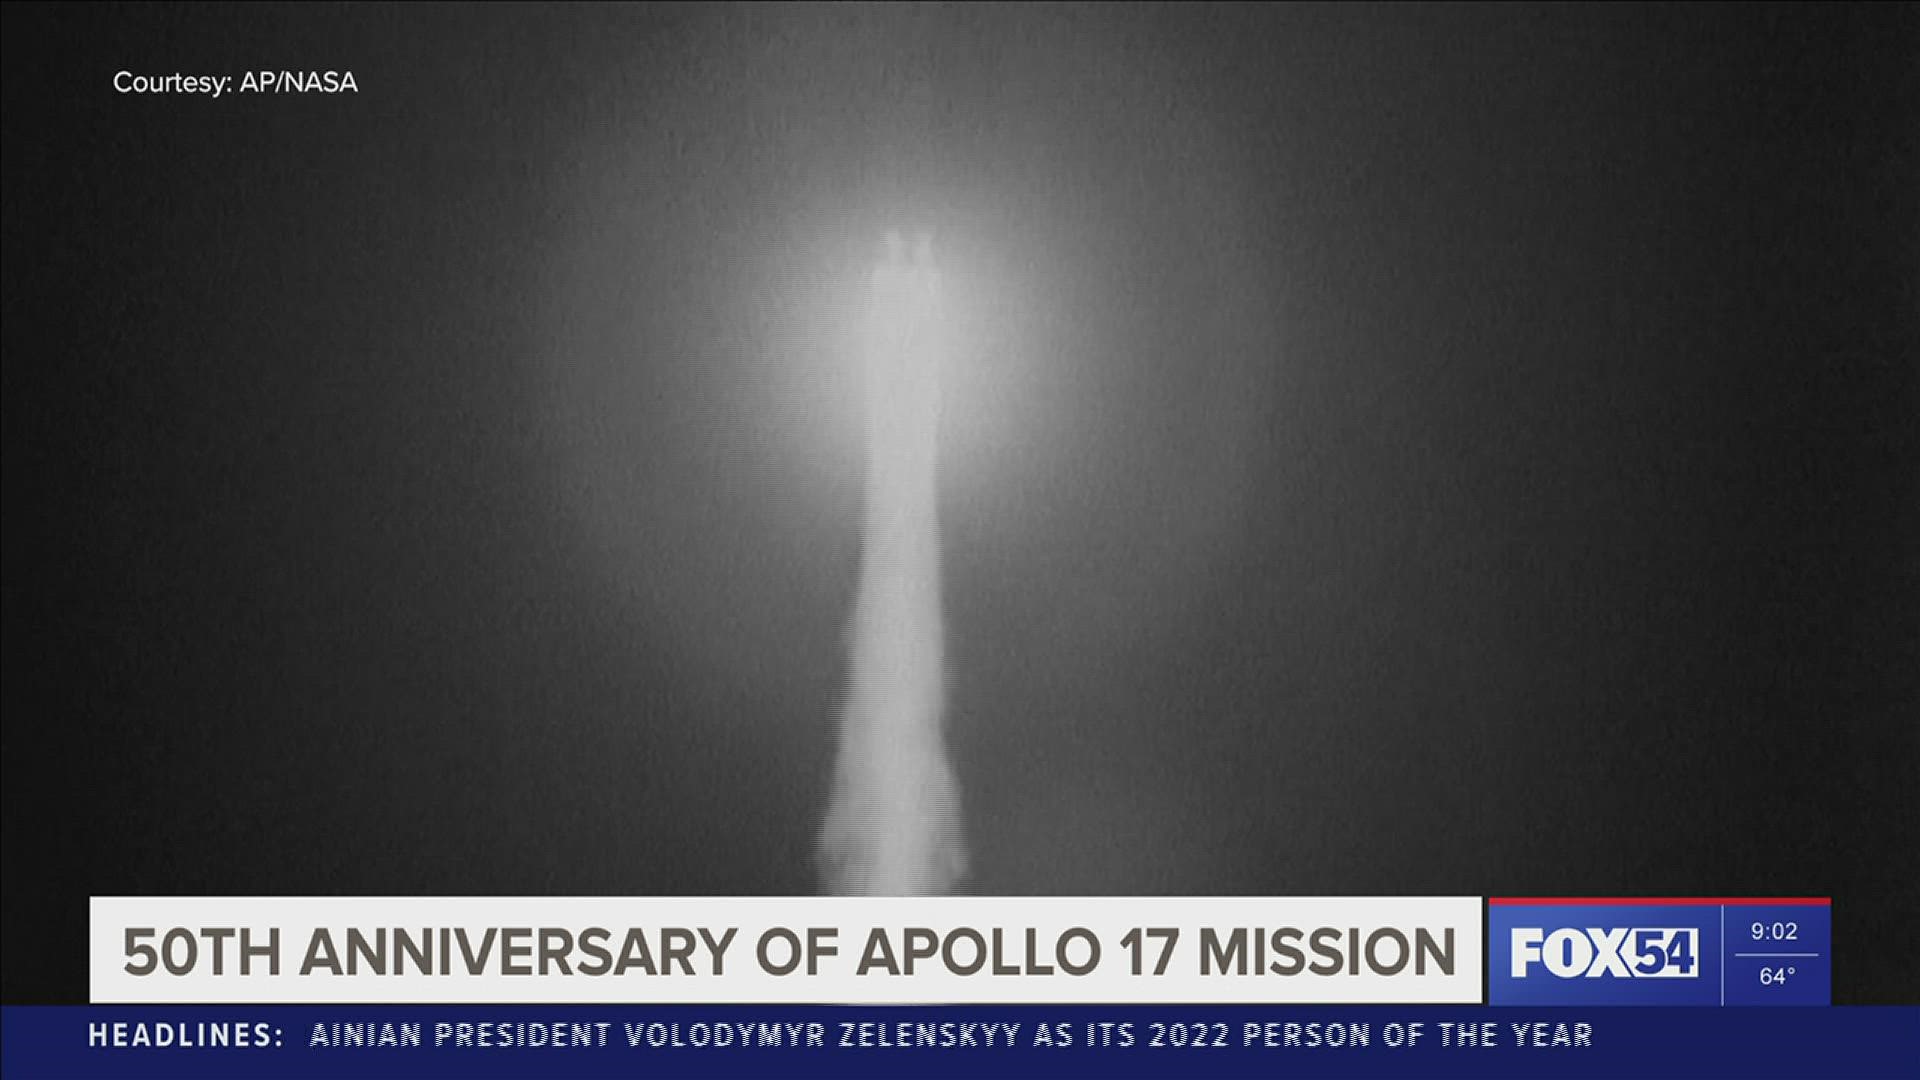 50 years ago today, Apollo 17 went on its last mission to the moon. See how the event was commemorated today in Huntsville, Alabama.